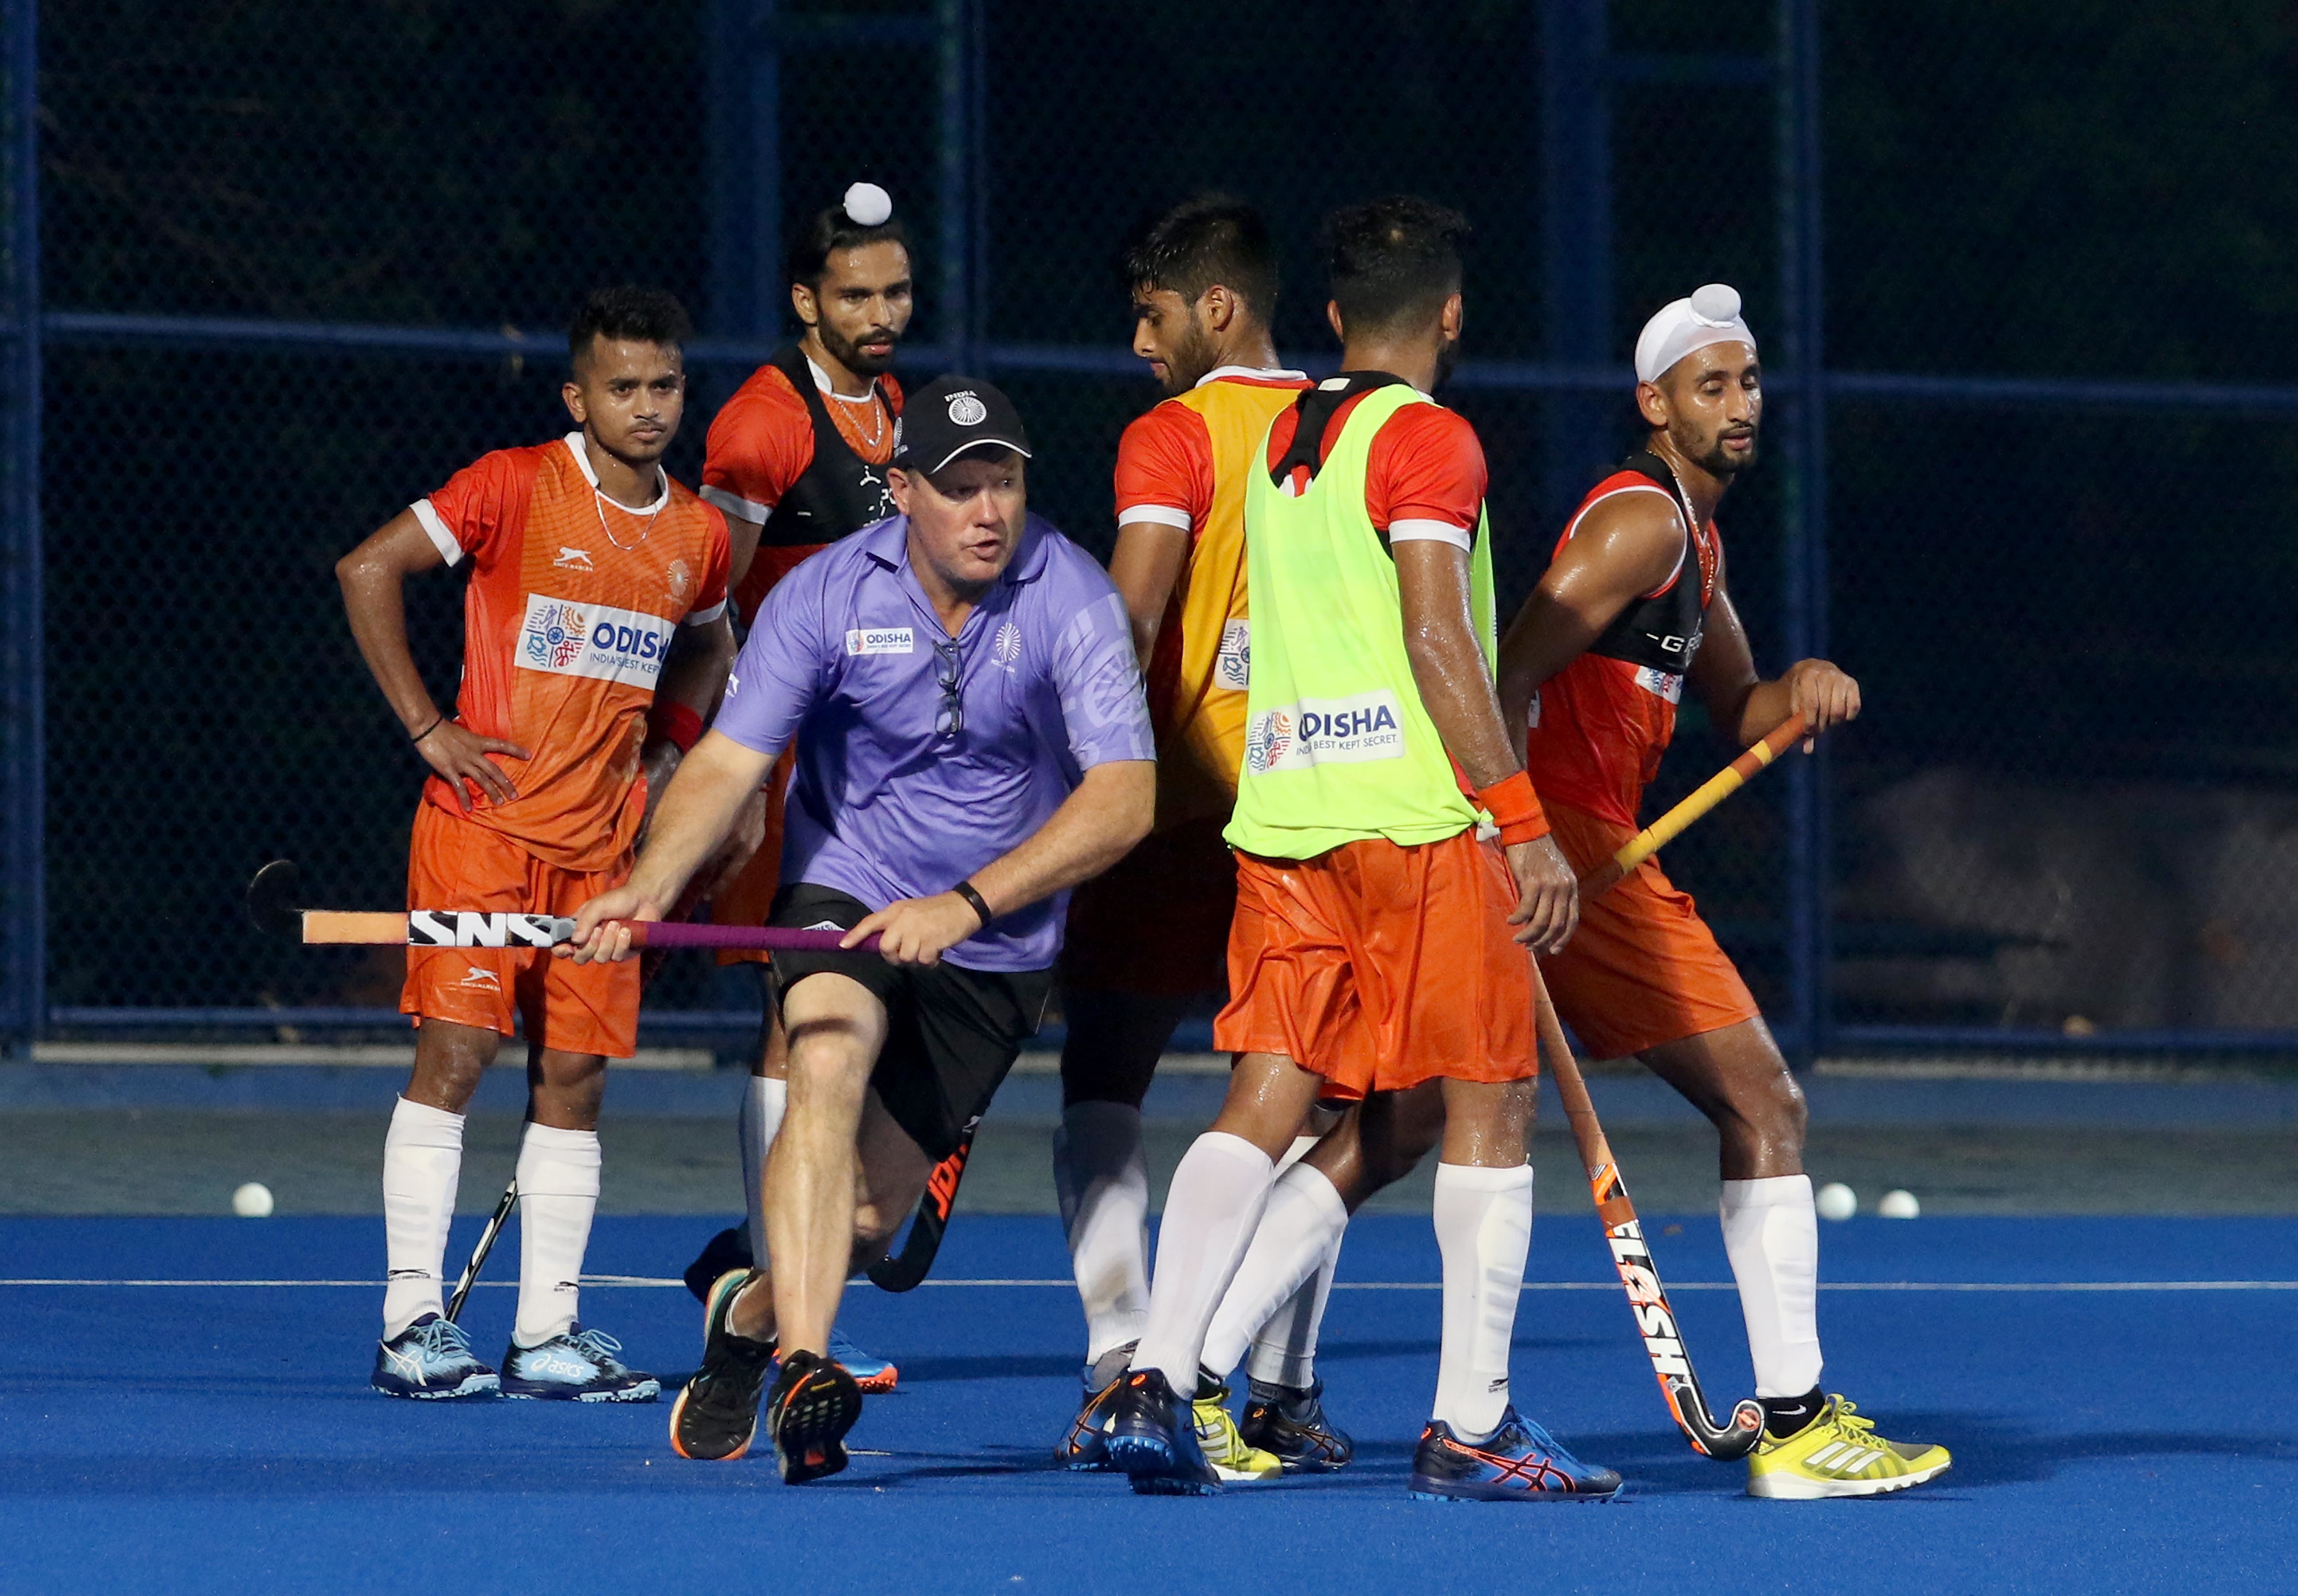 Hockey Pro League will give us tough top level competition ahead of Tokyo Olympics, claims Graham Reid